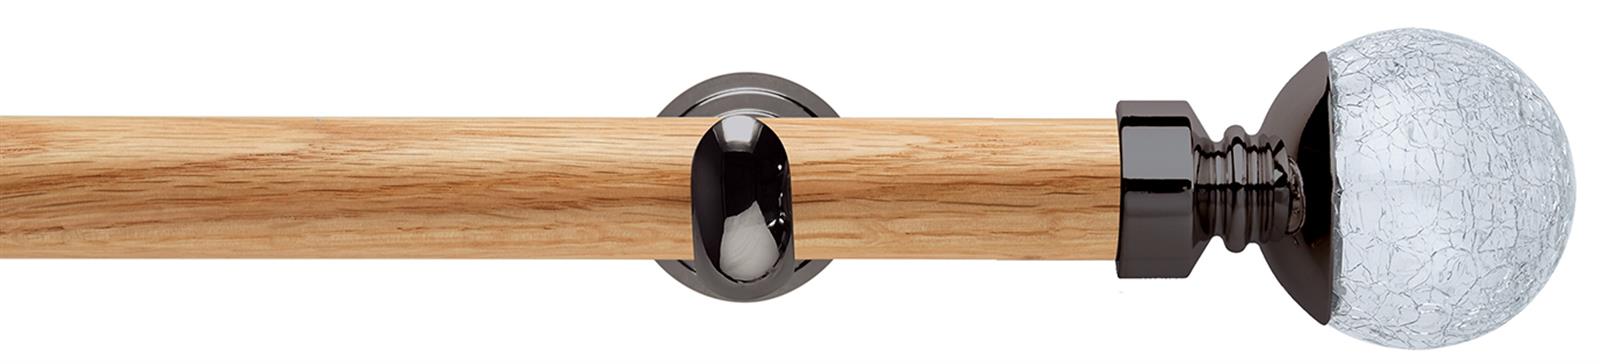 Neo 28mm Oak Wood Eyelet Pole, Black Nickel Cup, Crackled Glass Ball